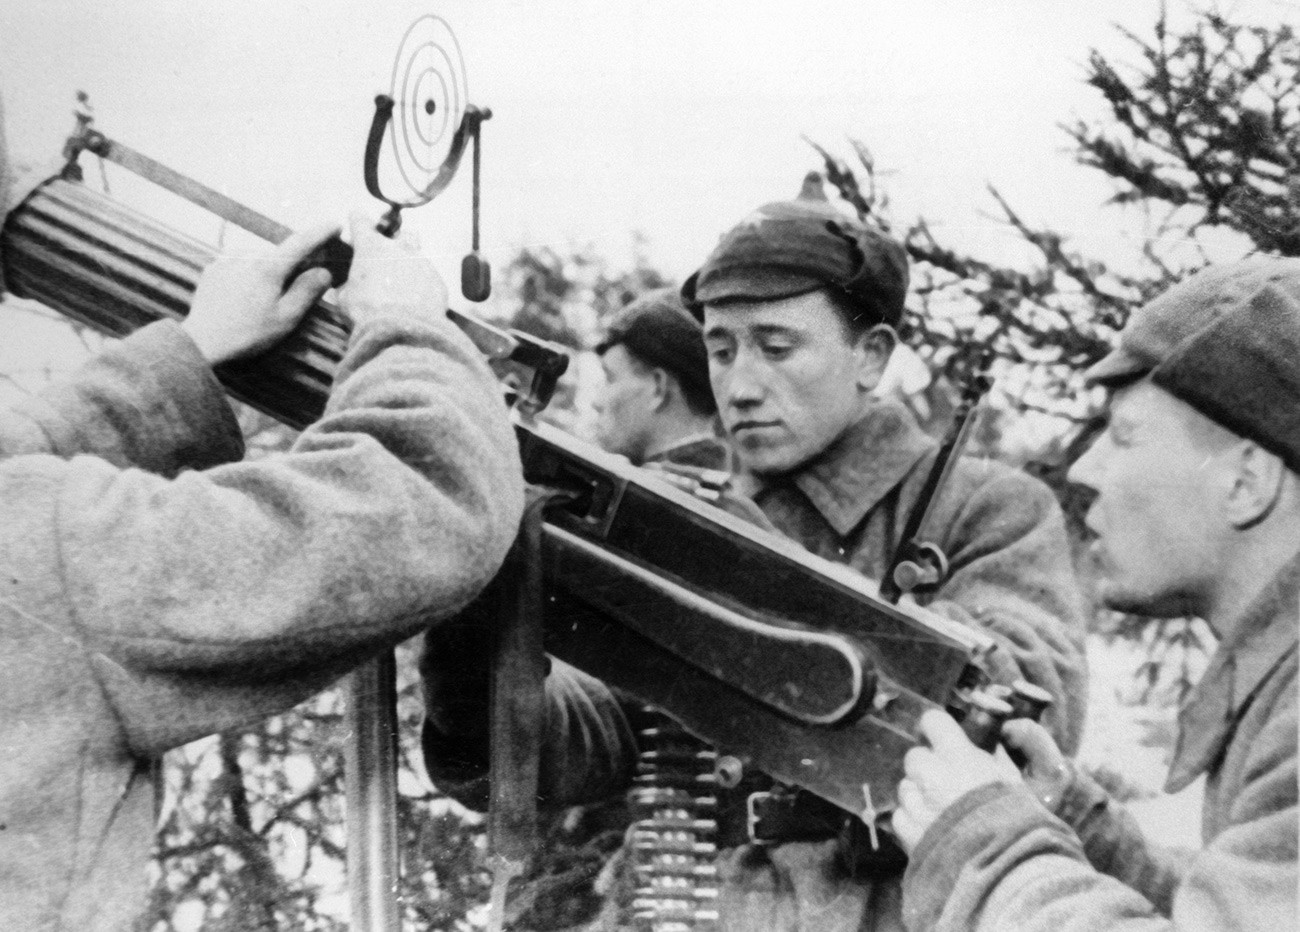 Red Army soldiers prepare anti-aircraft machine-gun for action.